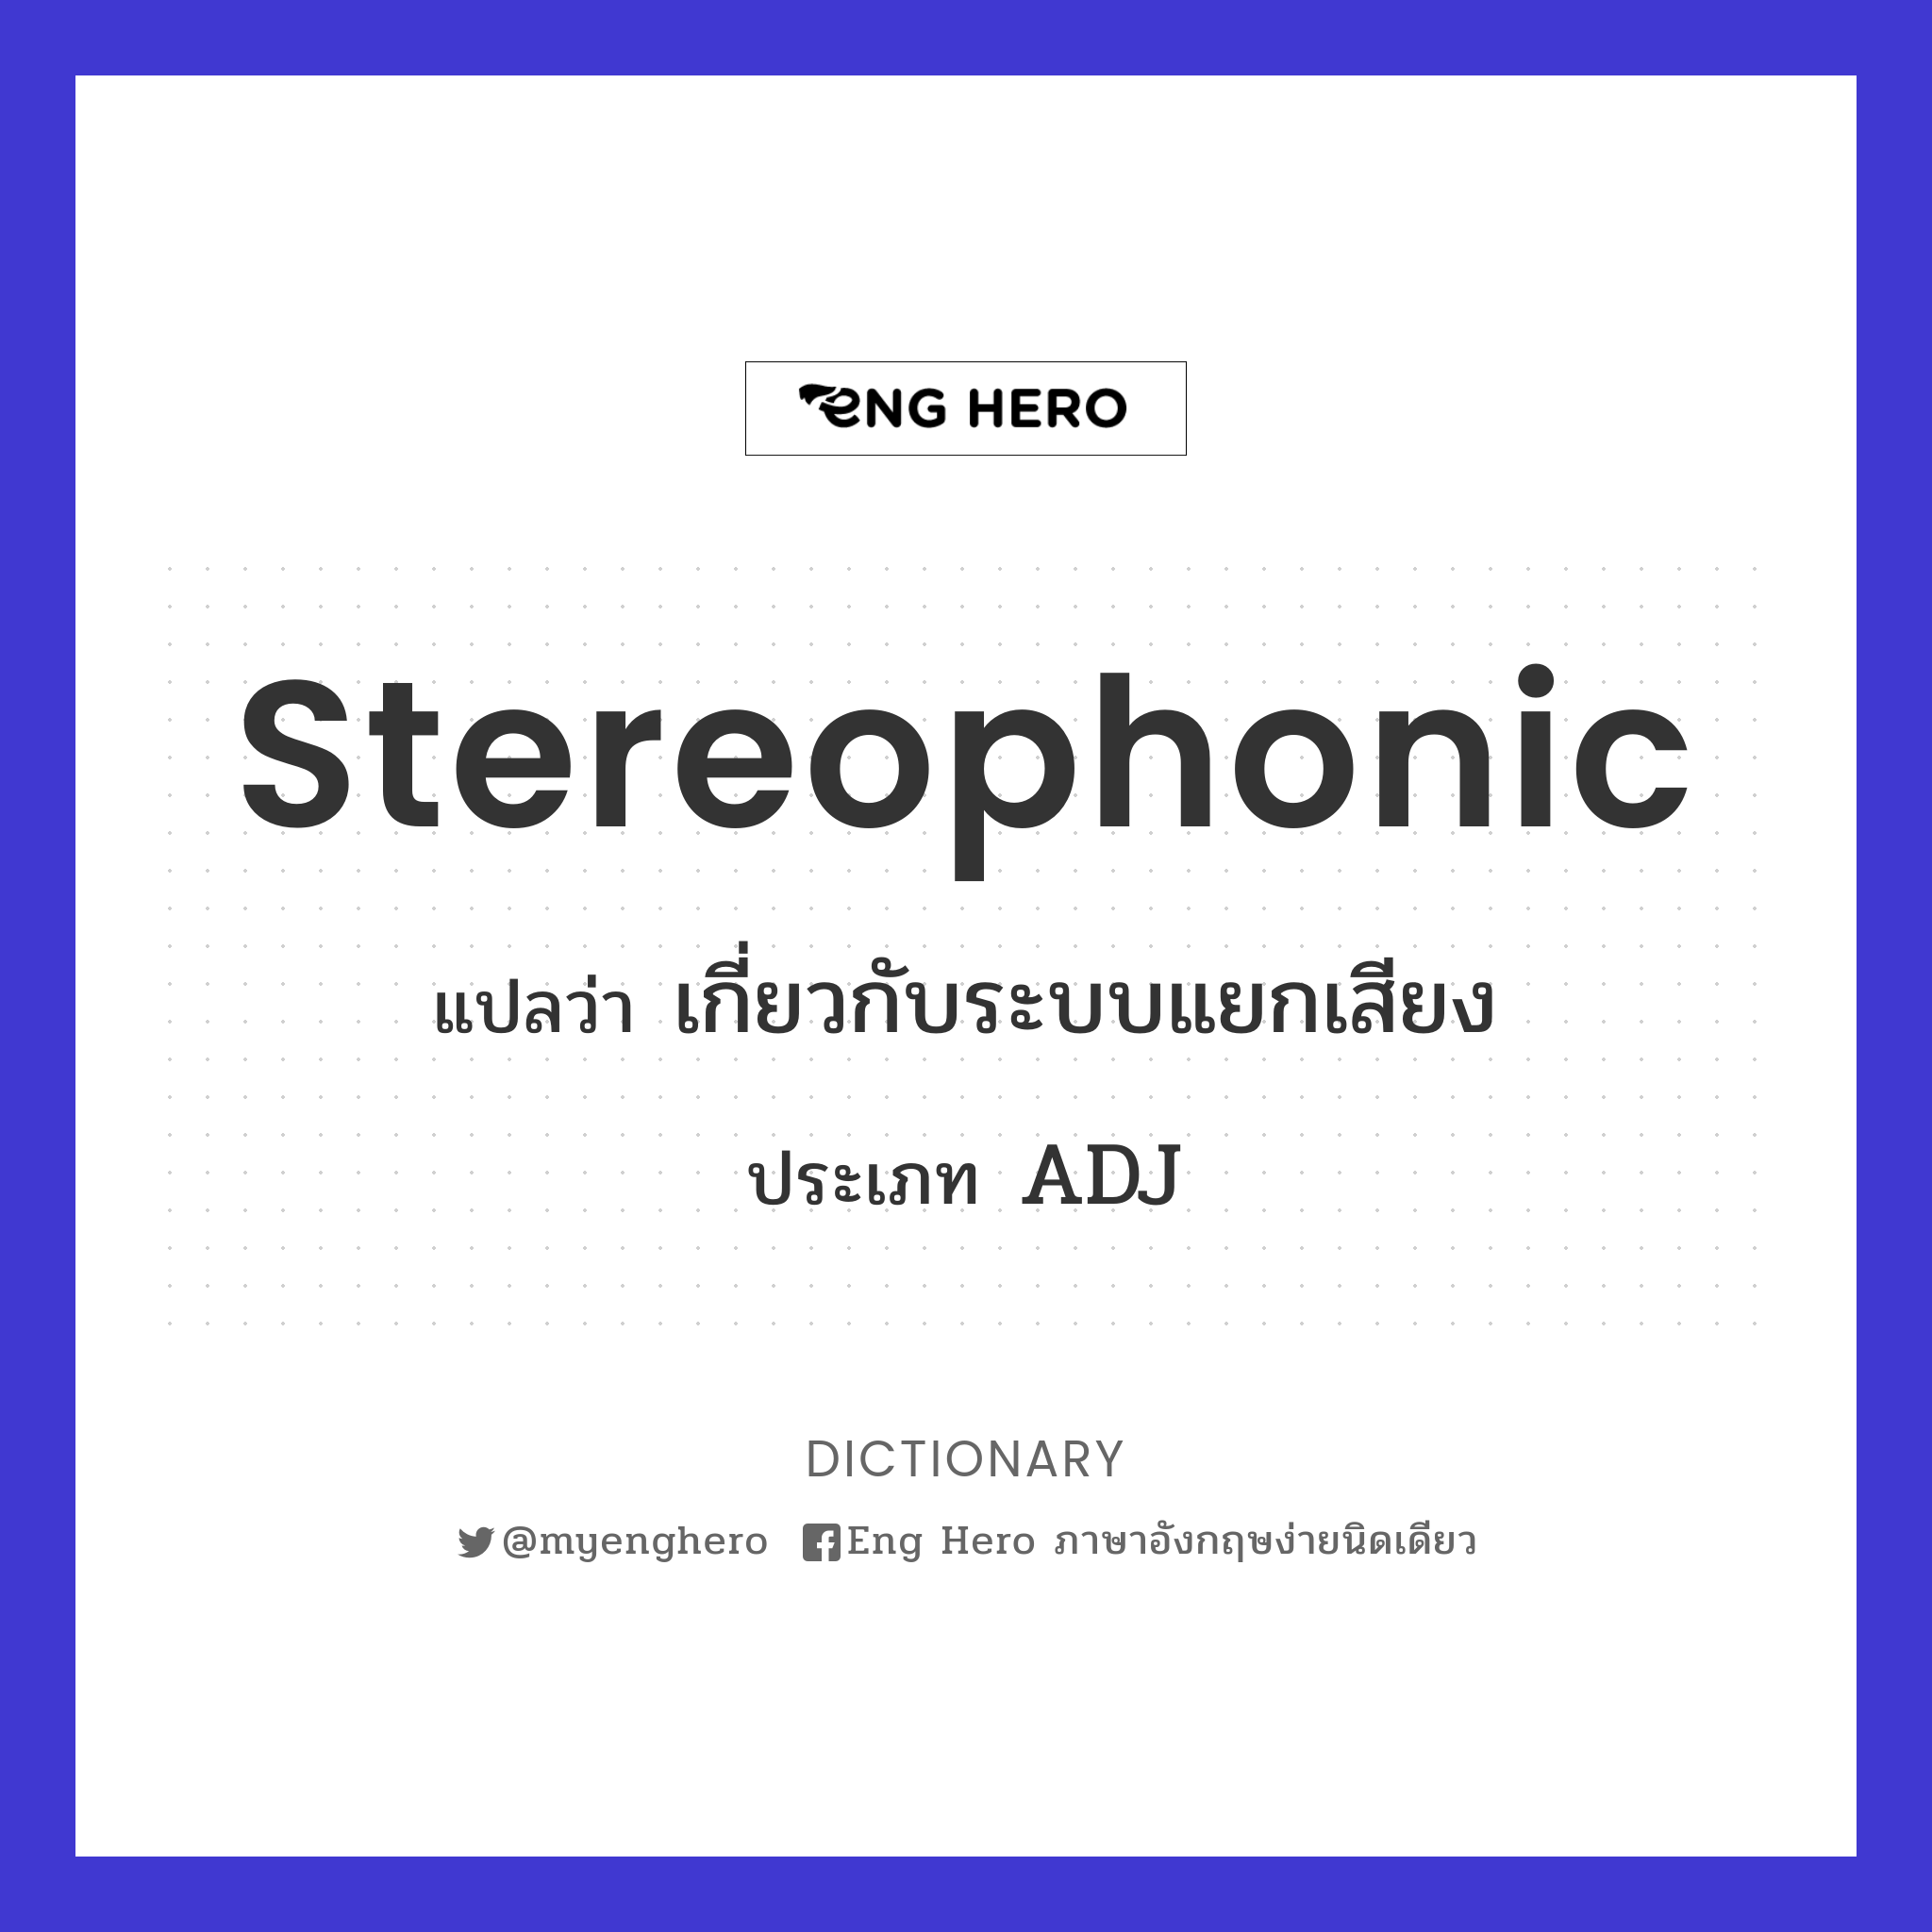 stereophonic